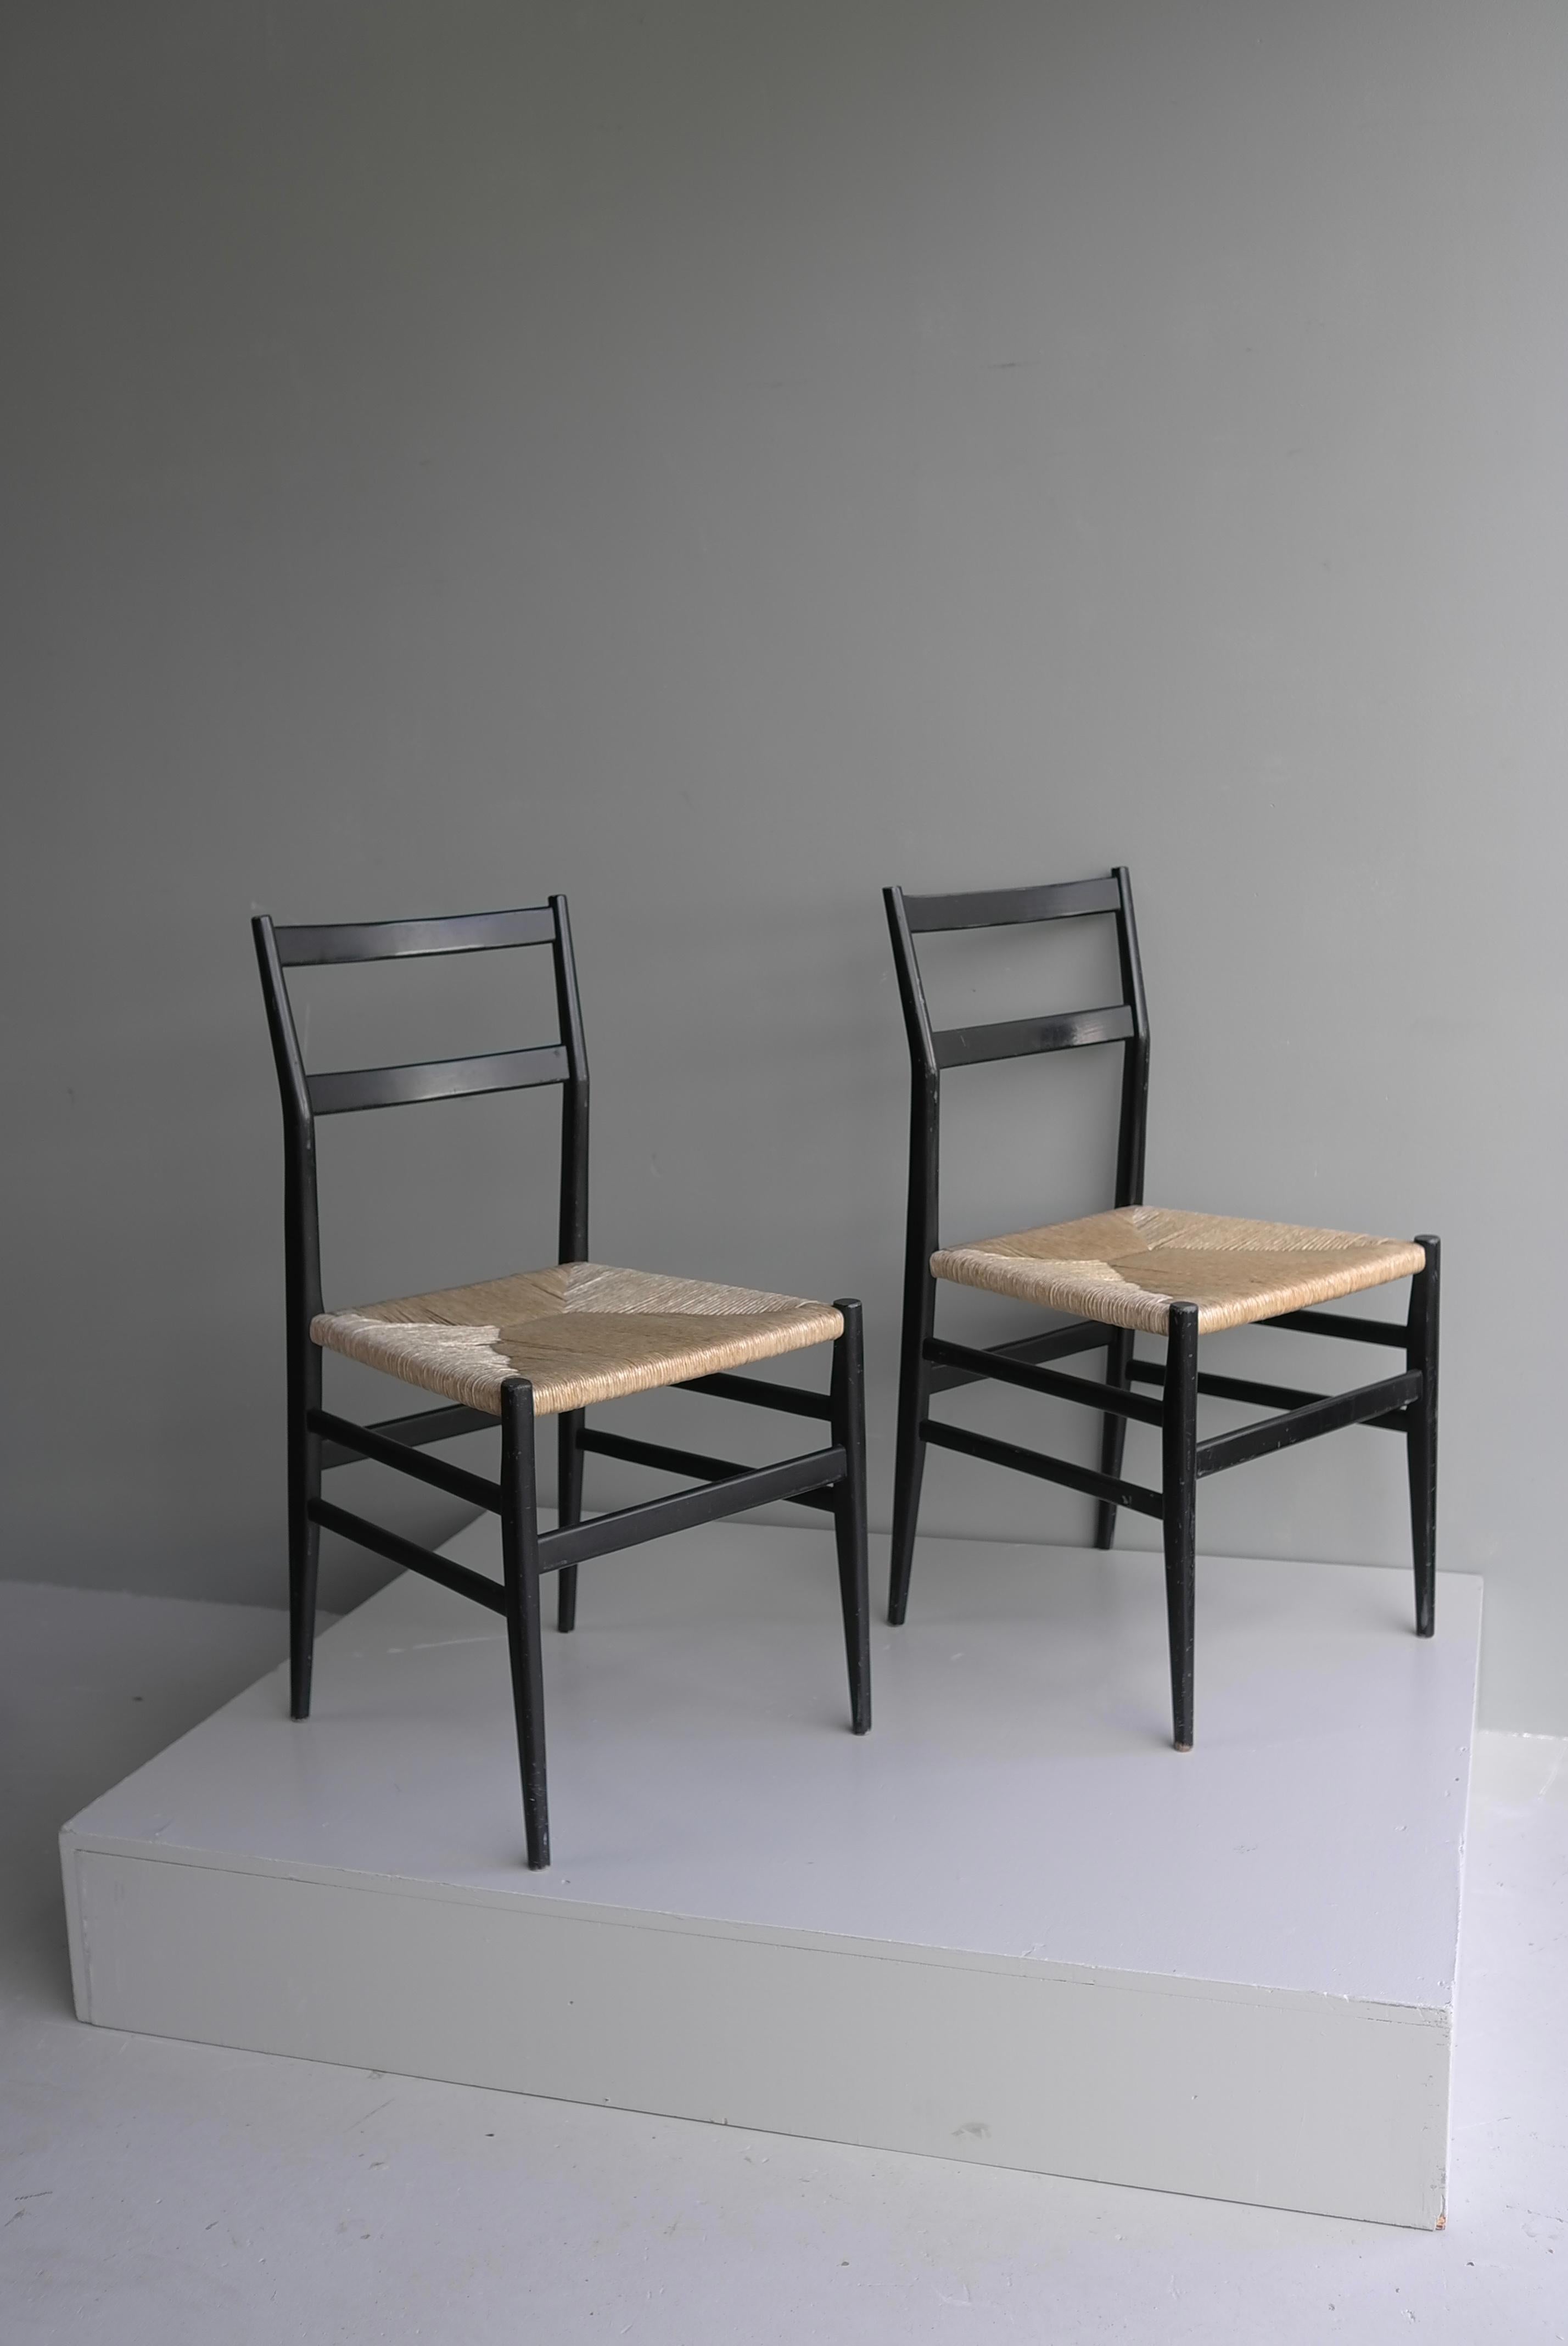 Pair of Black Gio Ponti Leggera Chairs with Cord Seat, Italy, 1951 For Sale 4